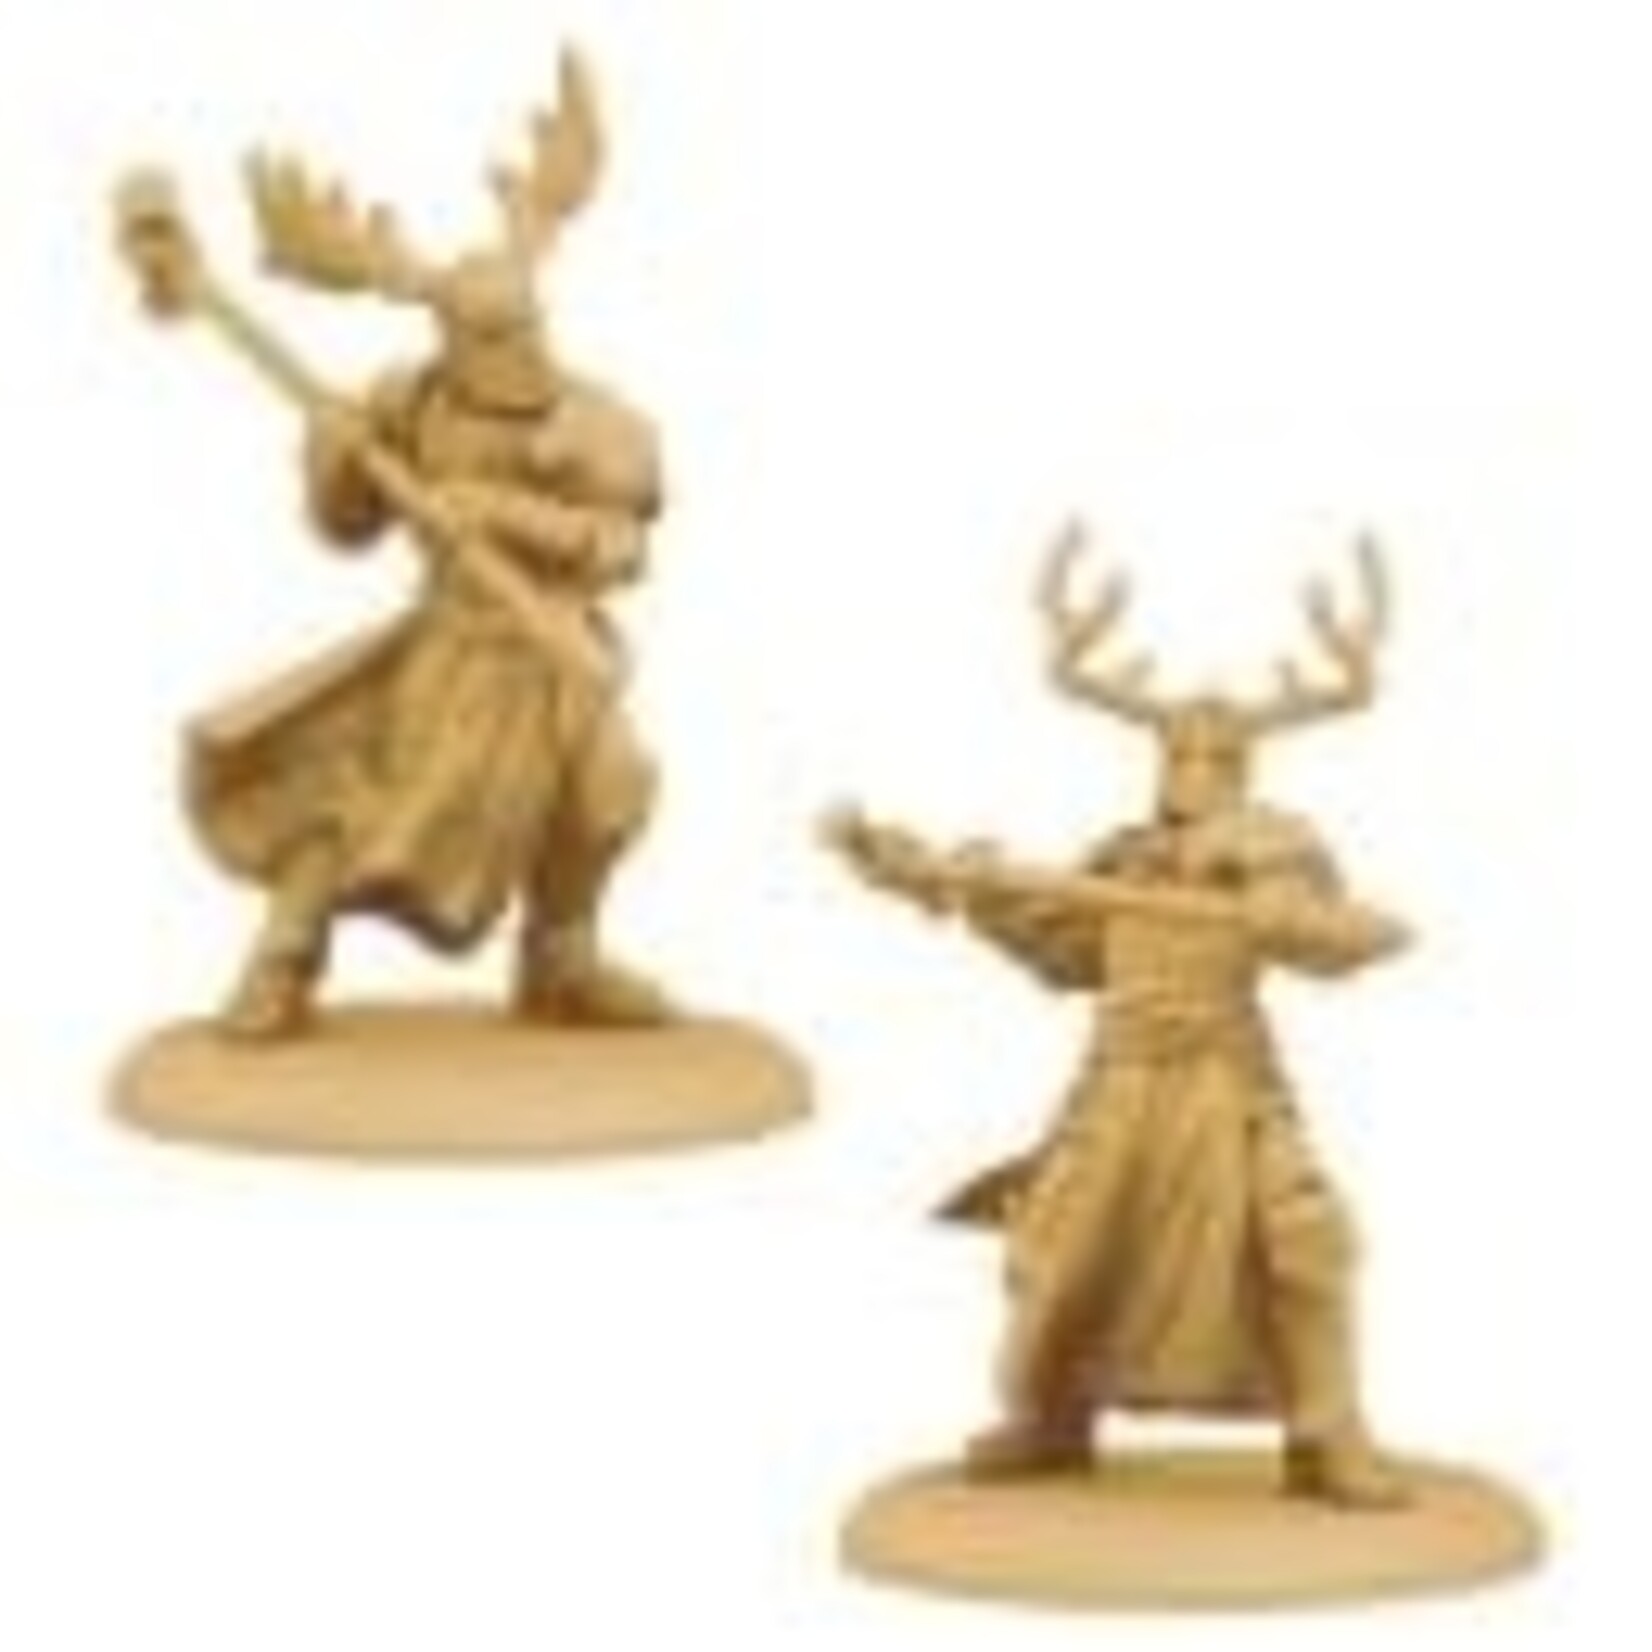 CMON A Song Of Ice & Fire: Stag Knights